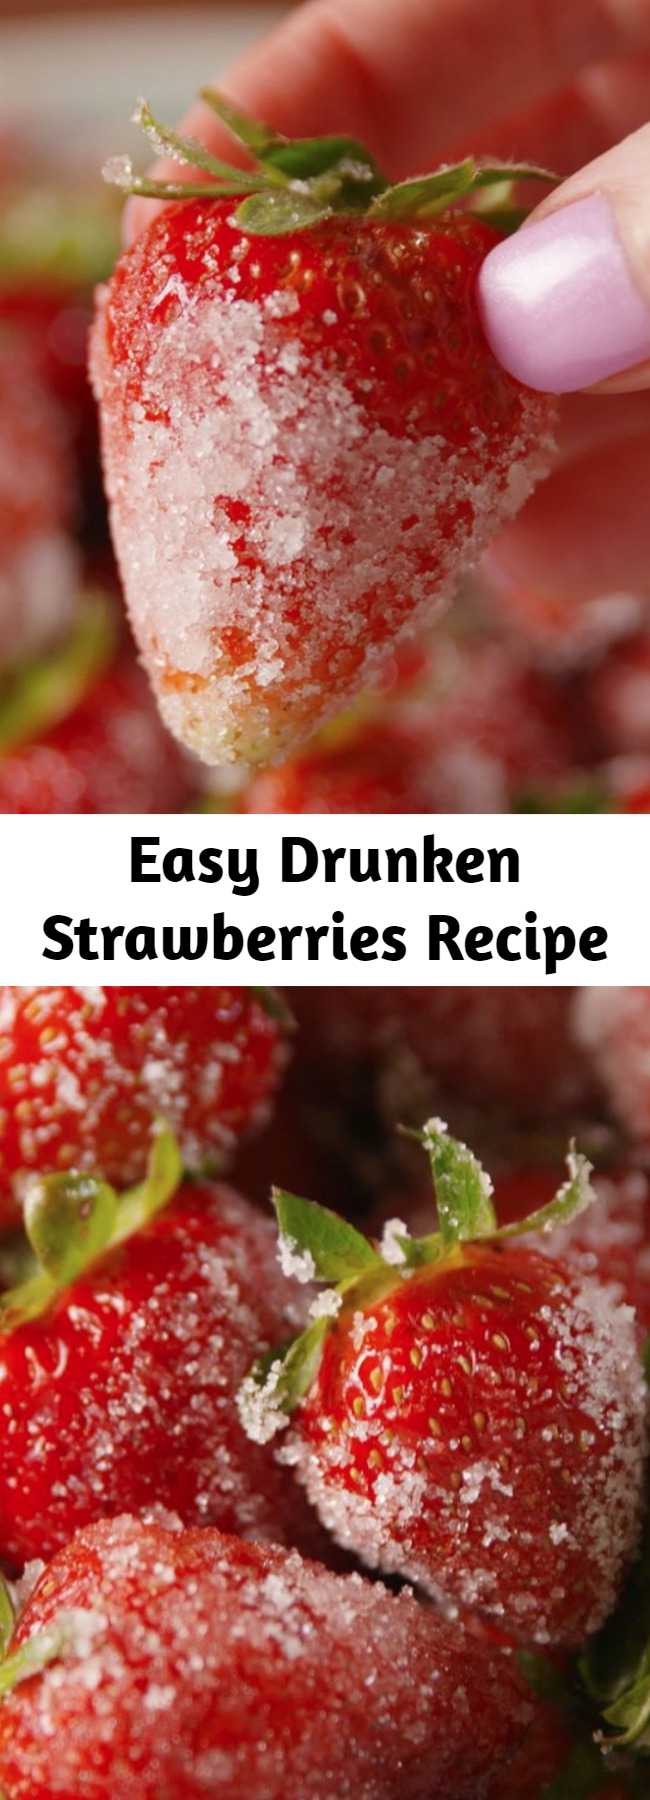 Easy Drunken Strawberries Recipe - This easy drunken strawberries recipe or whatever you want to call them, you’ll be calling them the perfect summer treat! Perfect to eat by themsleves or top a dessert. Easy to make with just 3 ingredients, you are going to love these boozy frozen strawberries!